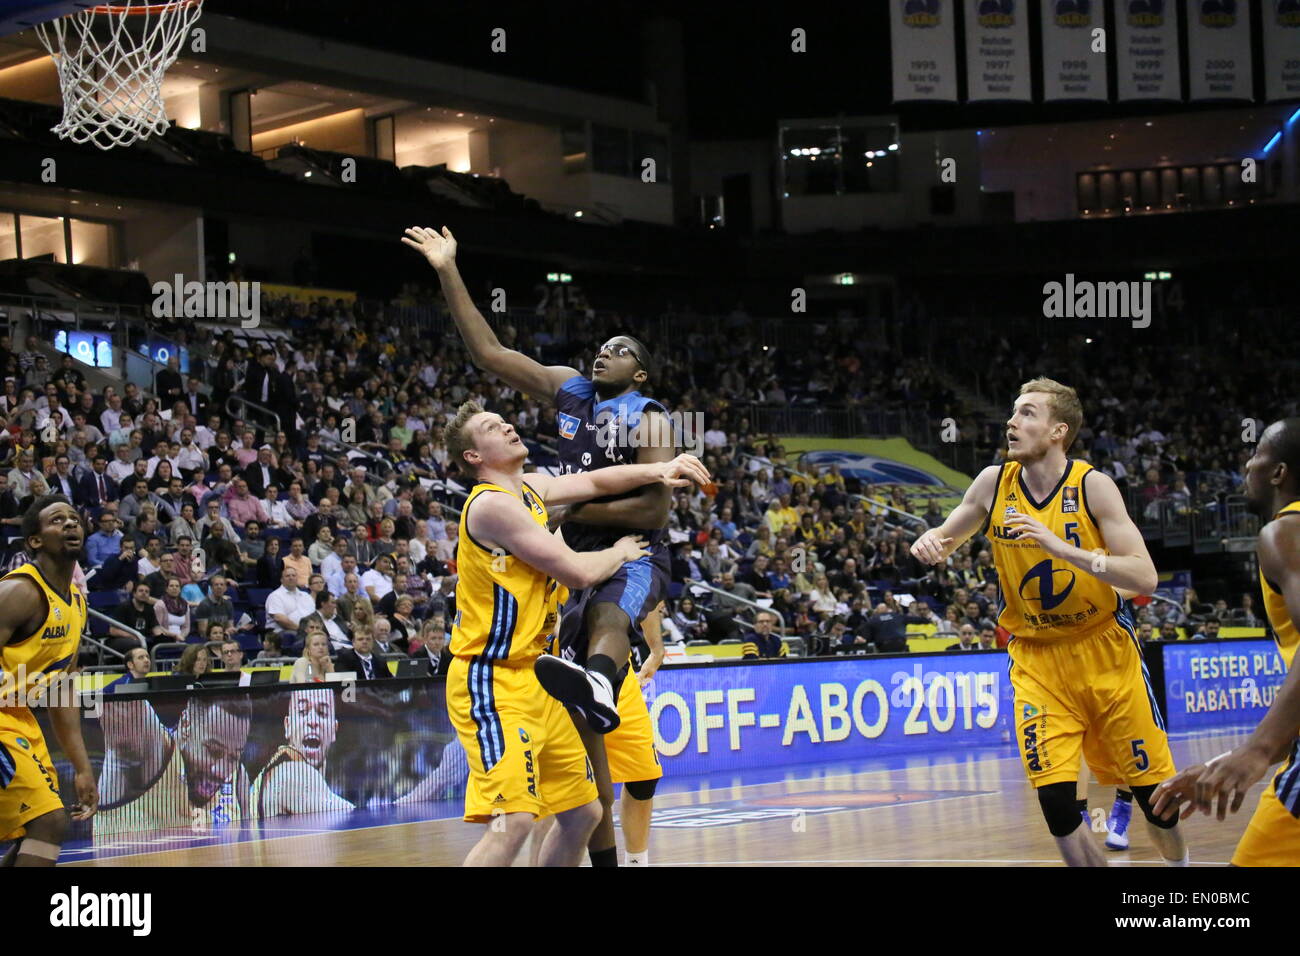 Berlin, Germany. 24th Apr, 2015. Chris Otule (42) and Leon Radosevic (43) in action during BBL game Alba Berlin versus Crailsheim Merlins at O2 World. Credit:  Madeleine Lenz/Pacific Press/Alamy Live News Stock Photo